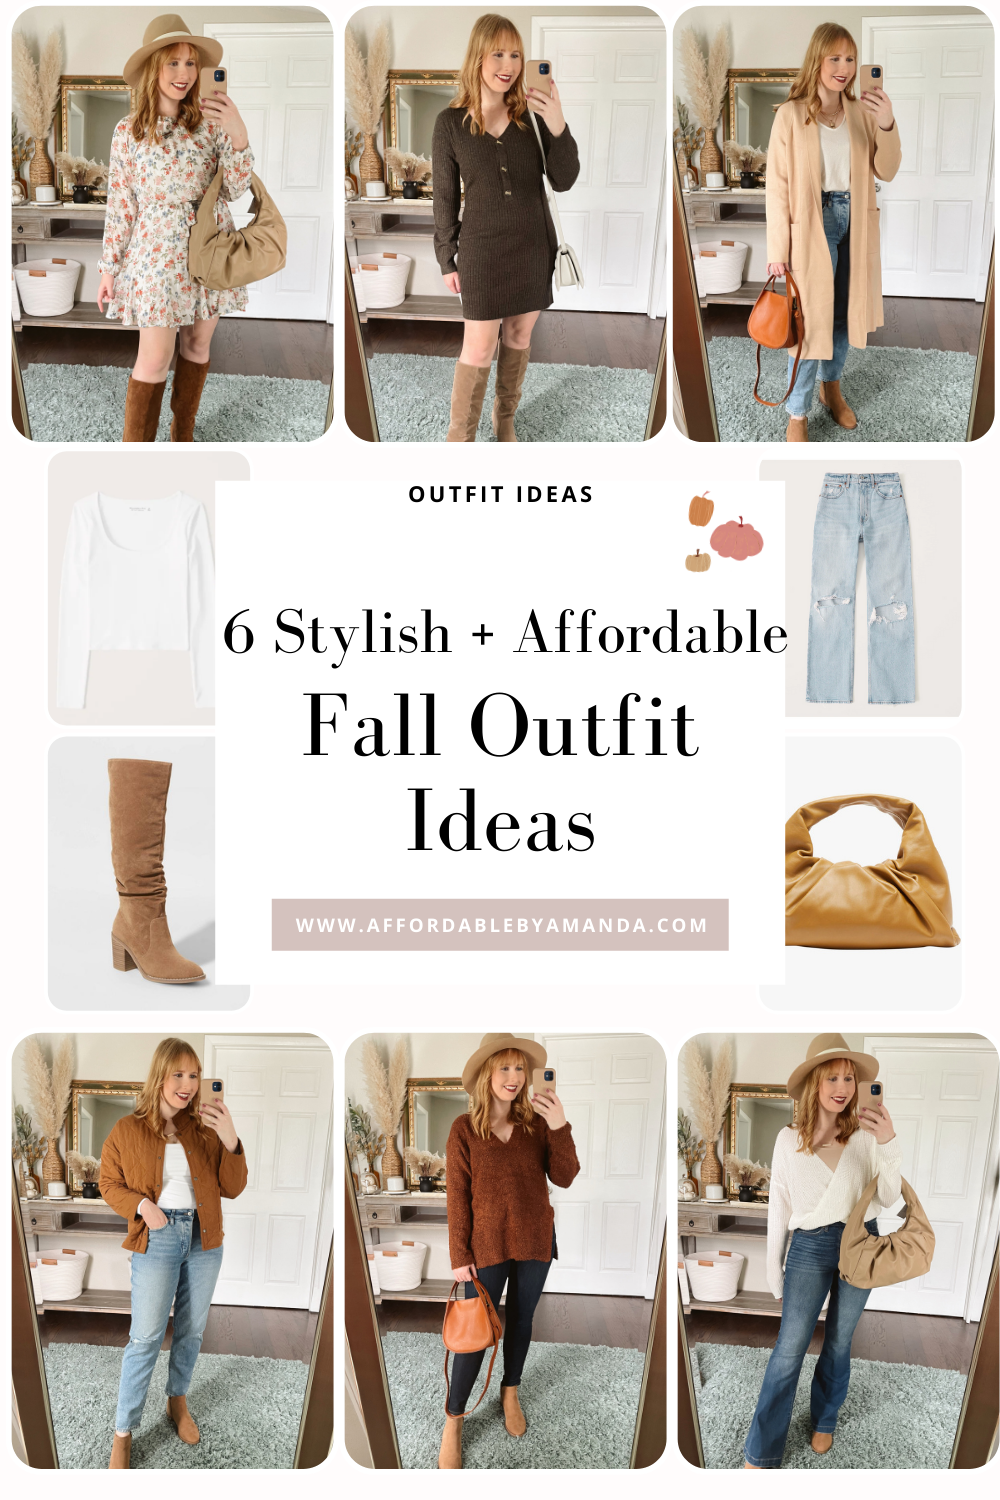 Inspiring Fall Outfits for the Best Look